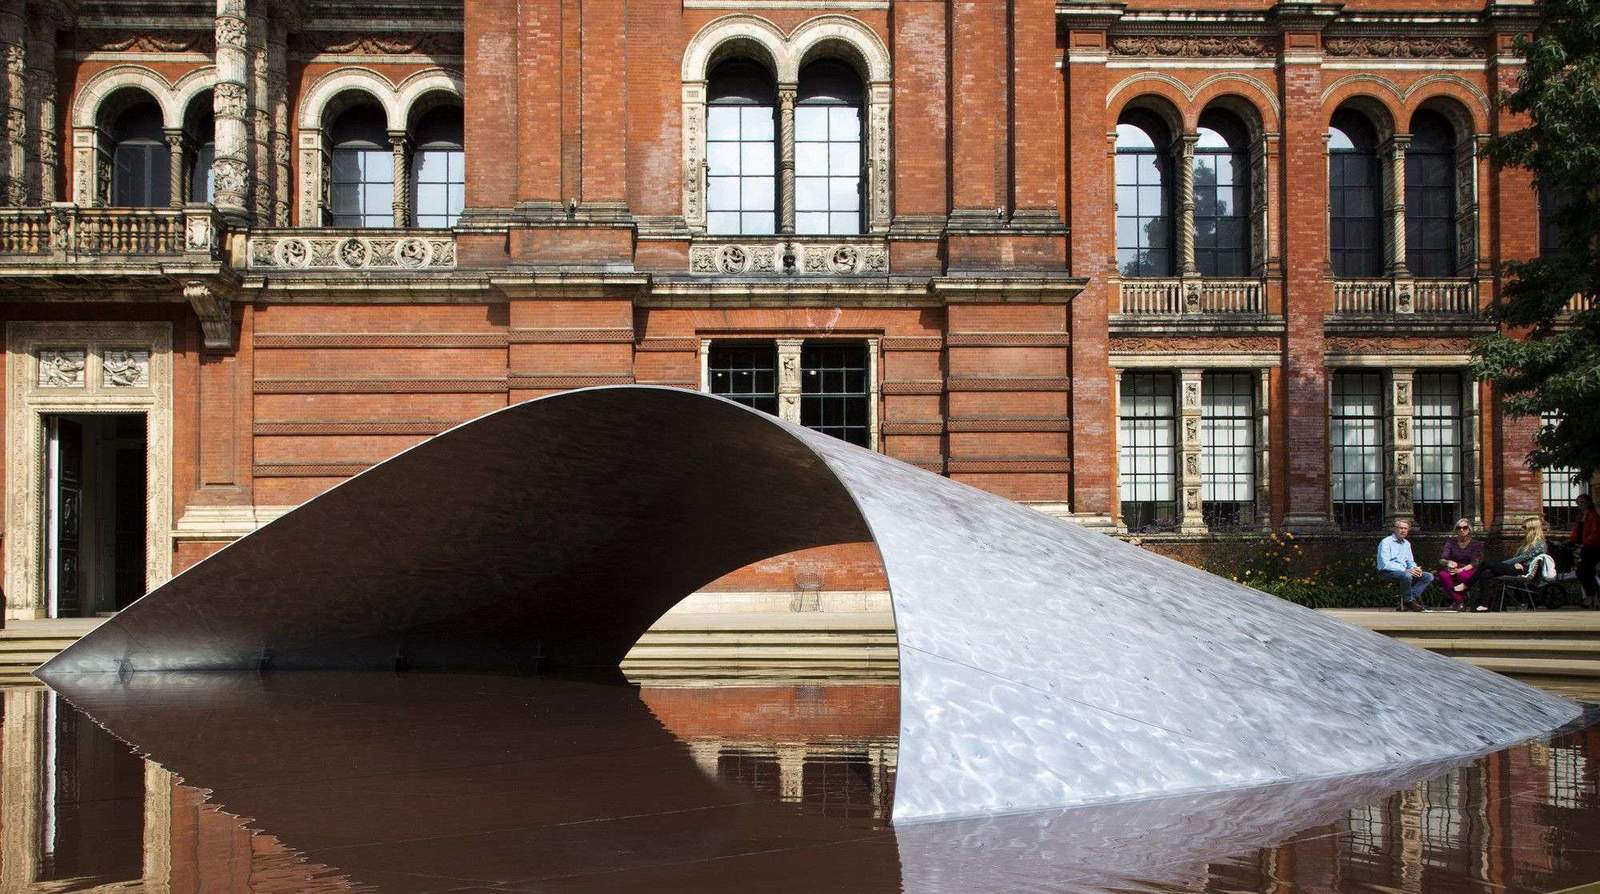 Crest,©Zaha Hadid Architects has constructed an experimental structure on the grounds of London’s V&A…